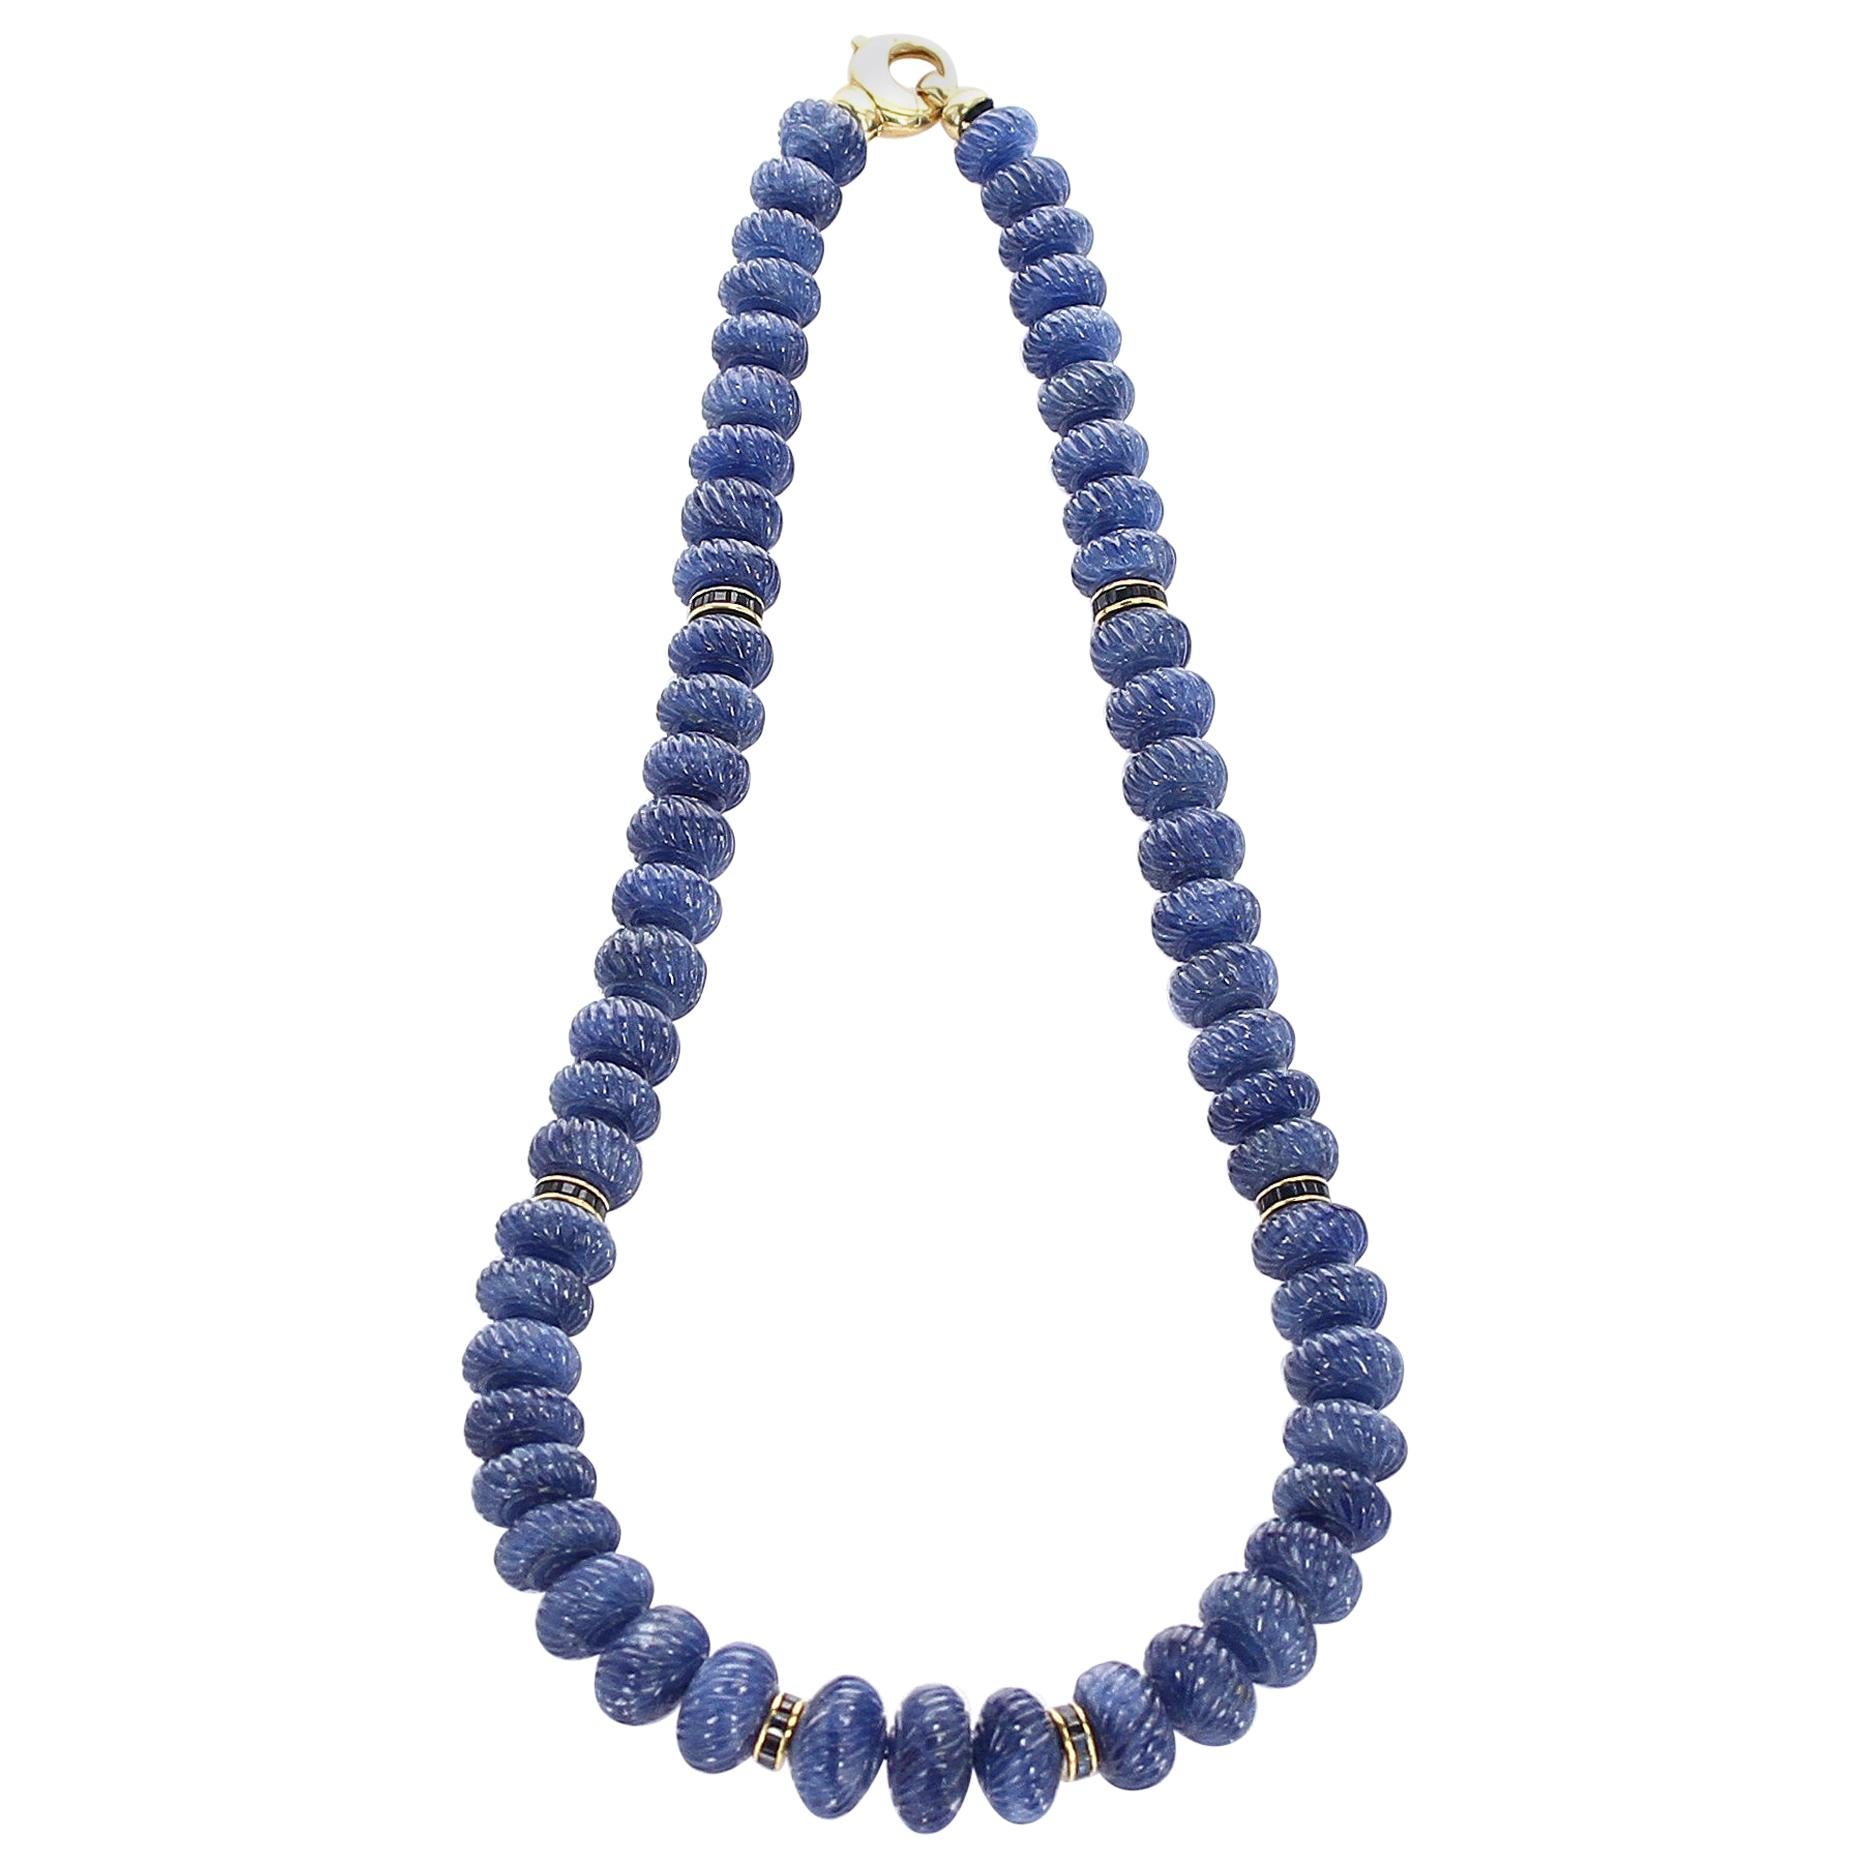 Details about   475.00 Cts Earth Mined Round Shape 6 Strand Blue Sapphire Beads Necklace NK02E25 